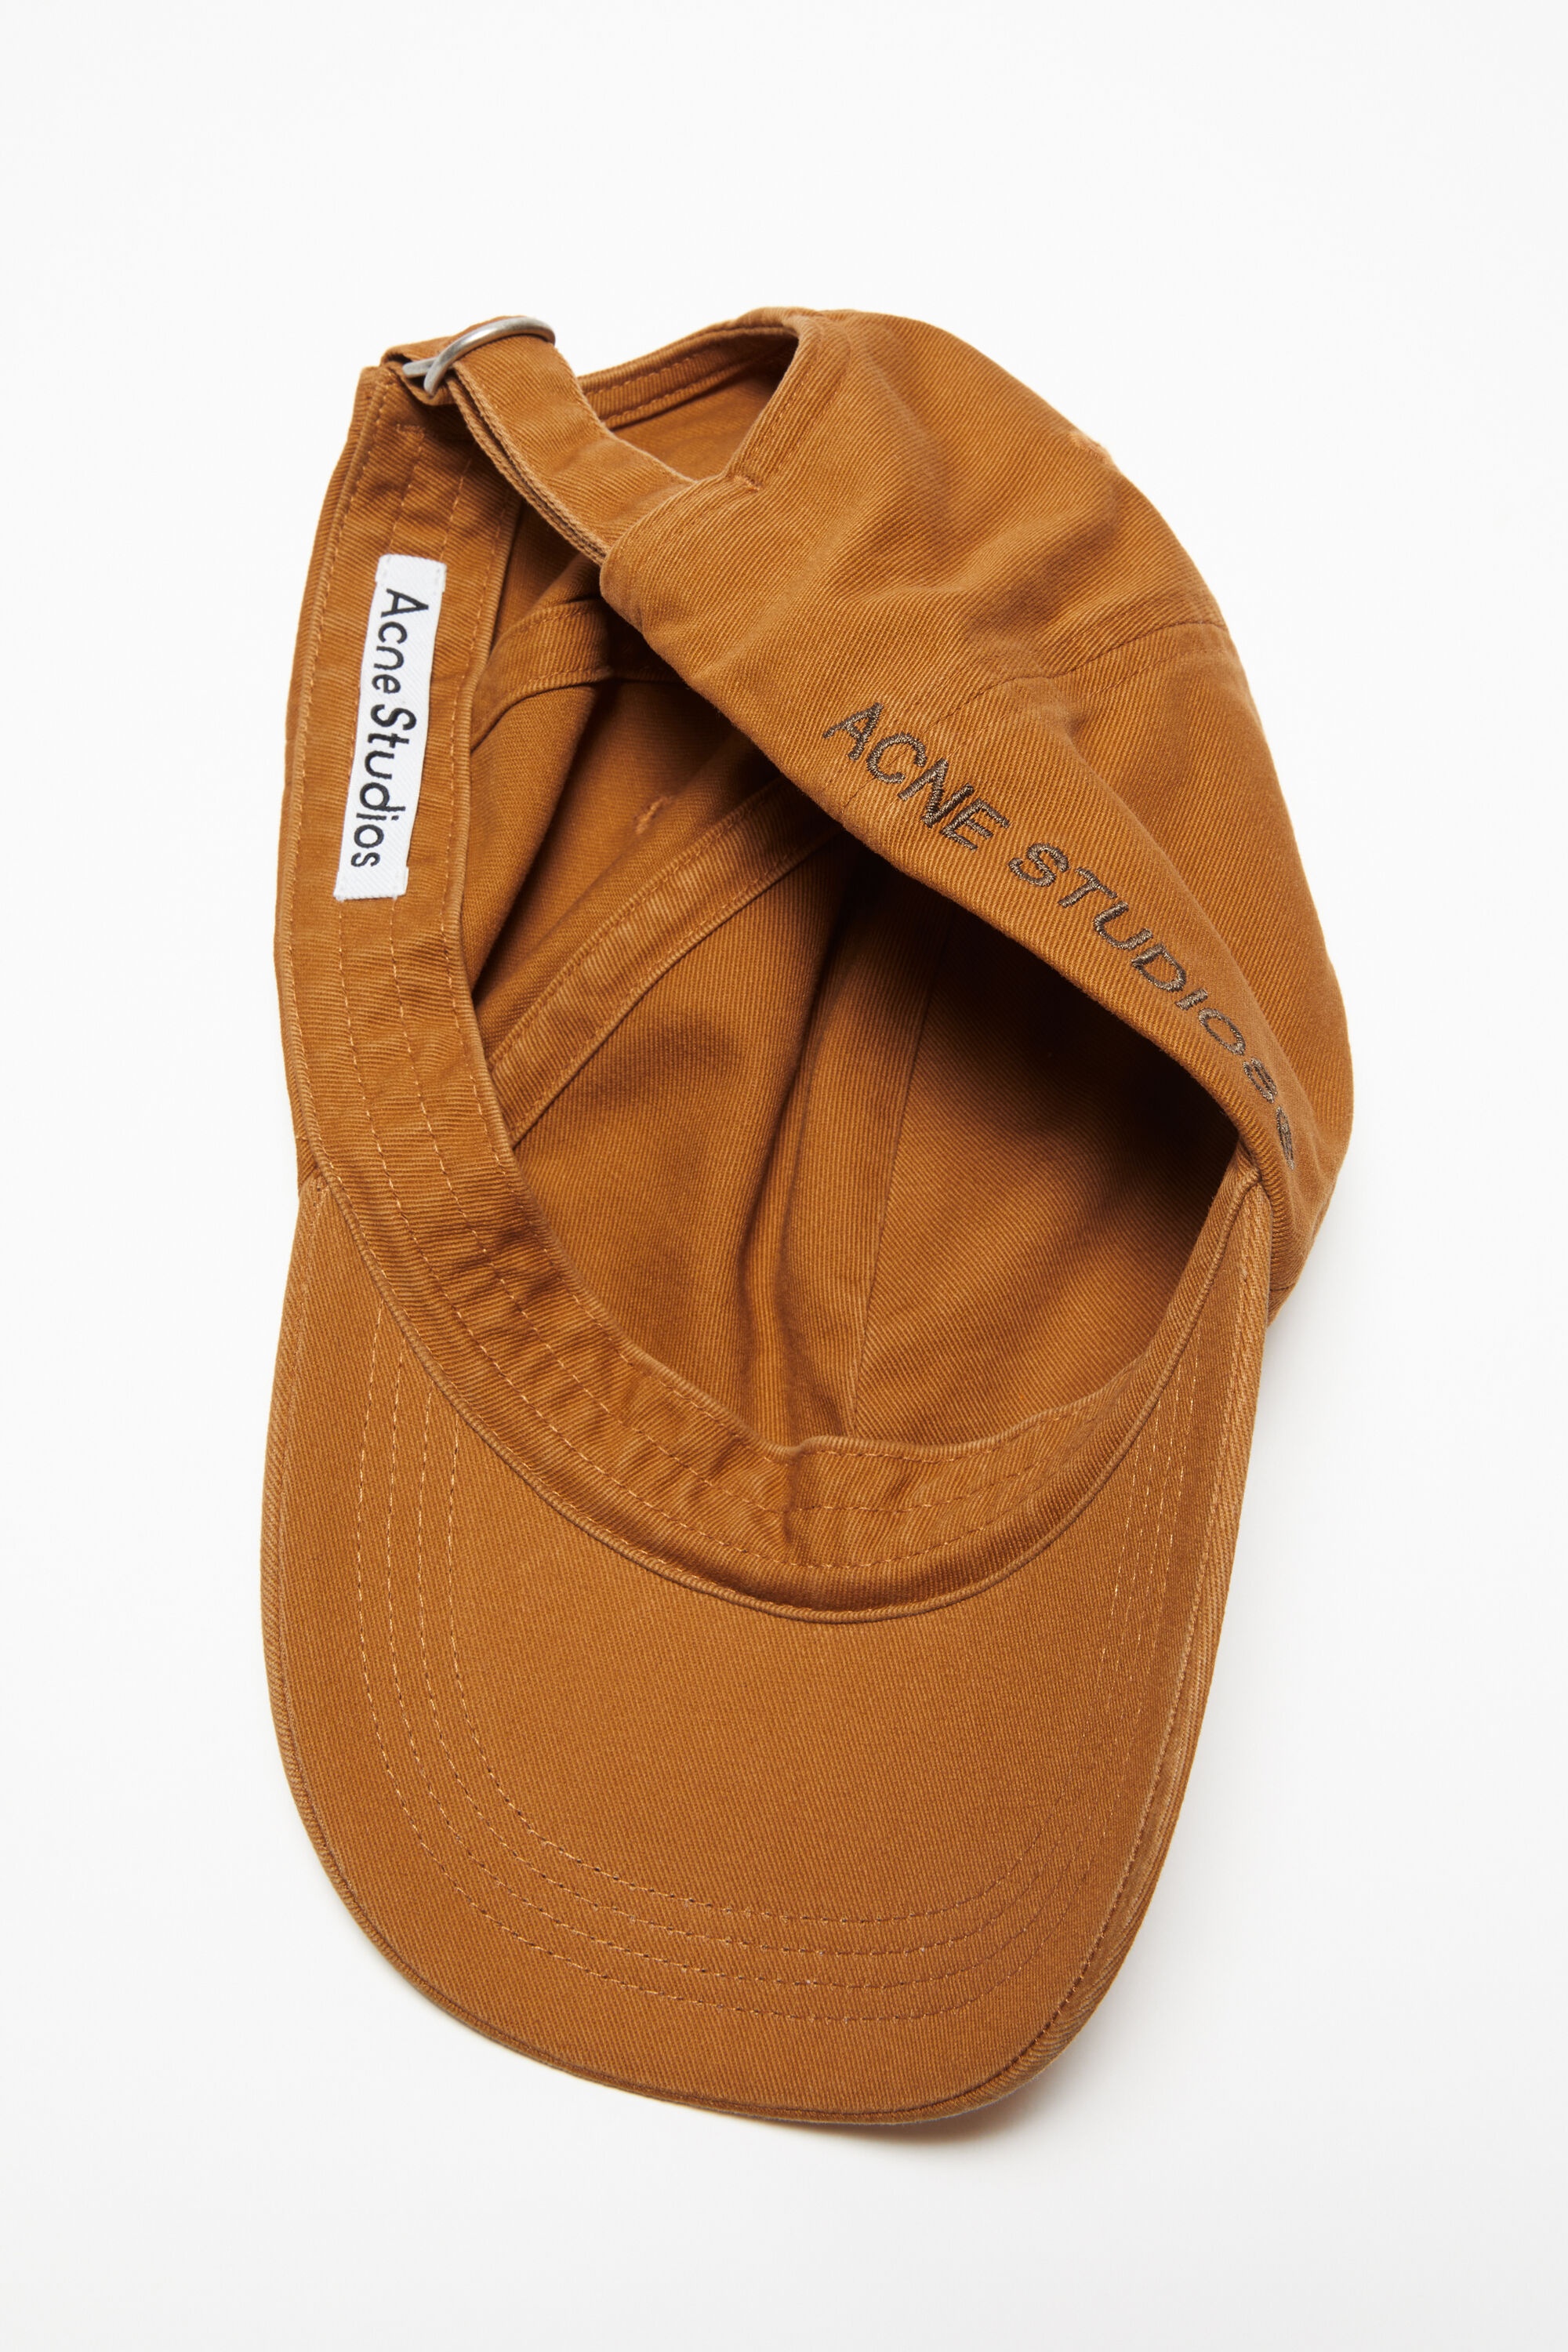 Twill cap - Toffee brown - 4